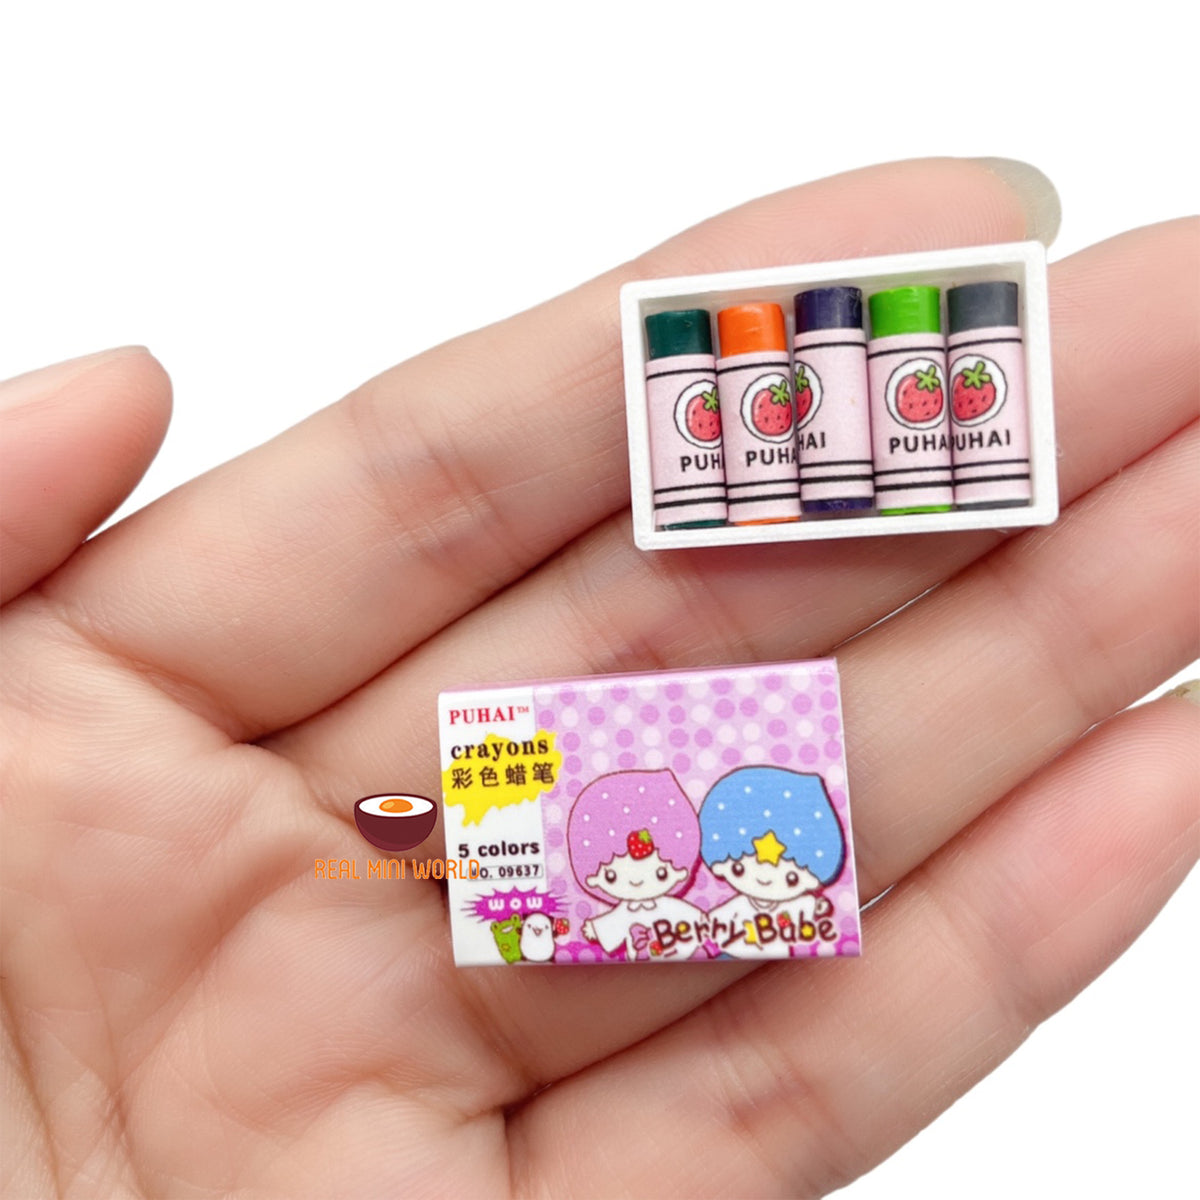 Miniature working Crayon set (made from real crayons) 1/6 Scale